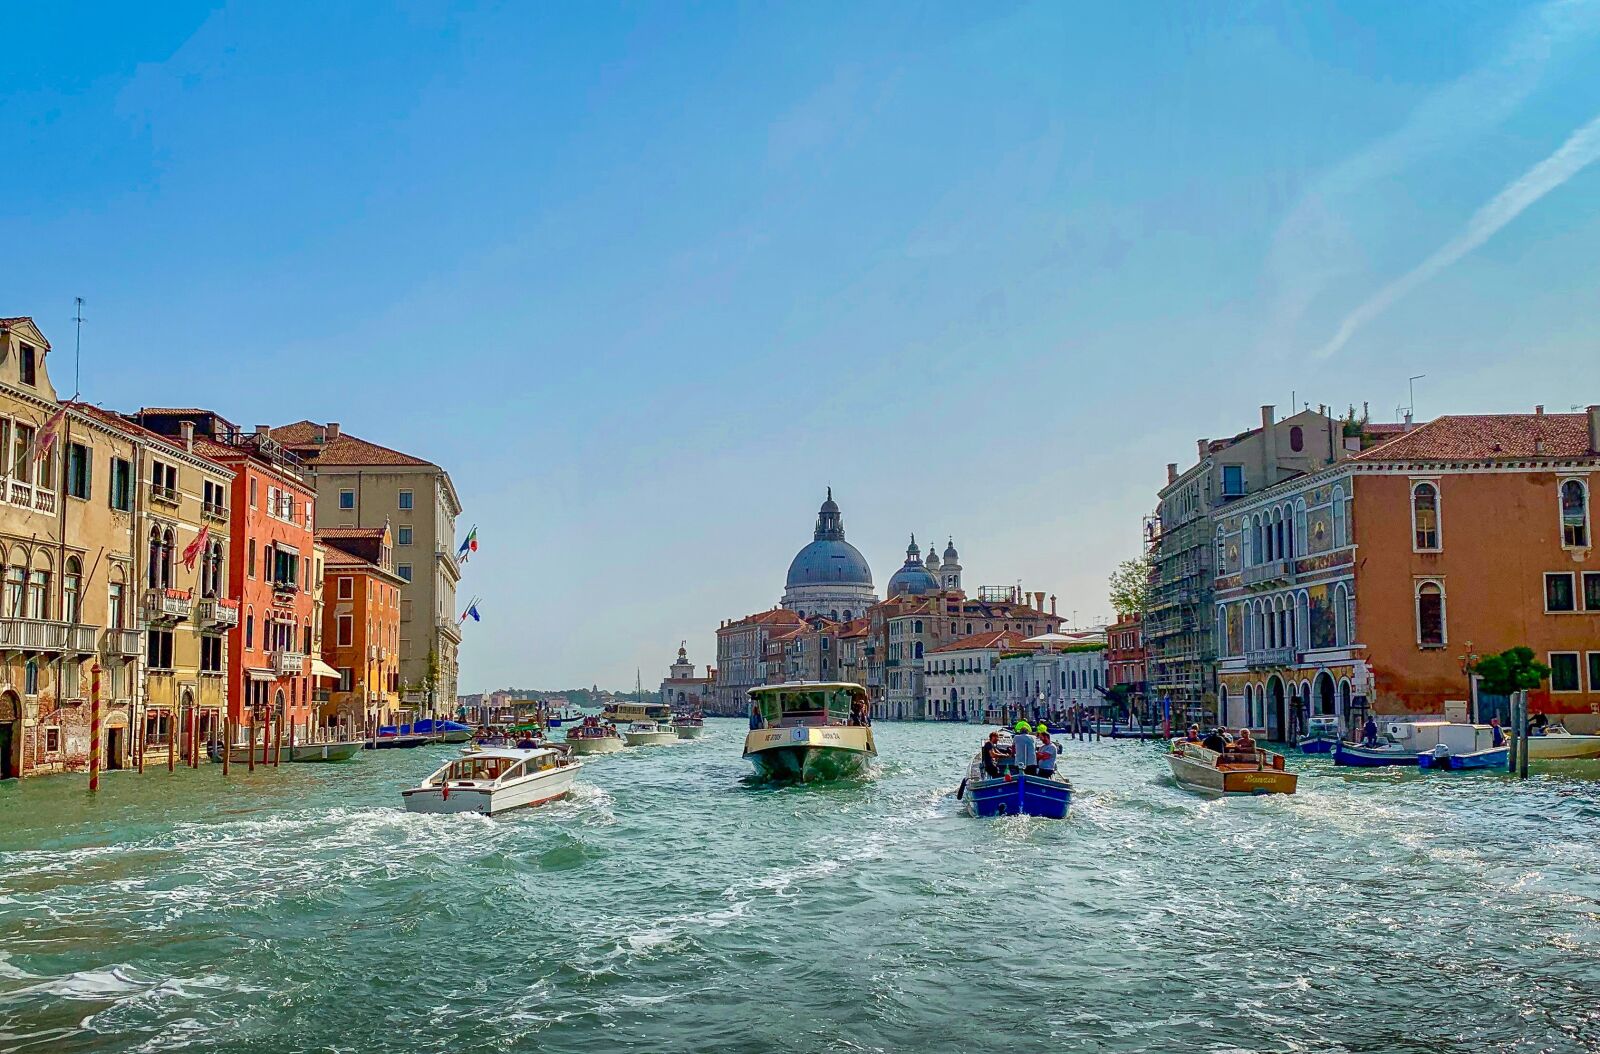 Apple iPhone XR sample photo. Grand canal, venice, italy photography